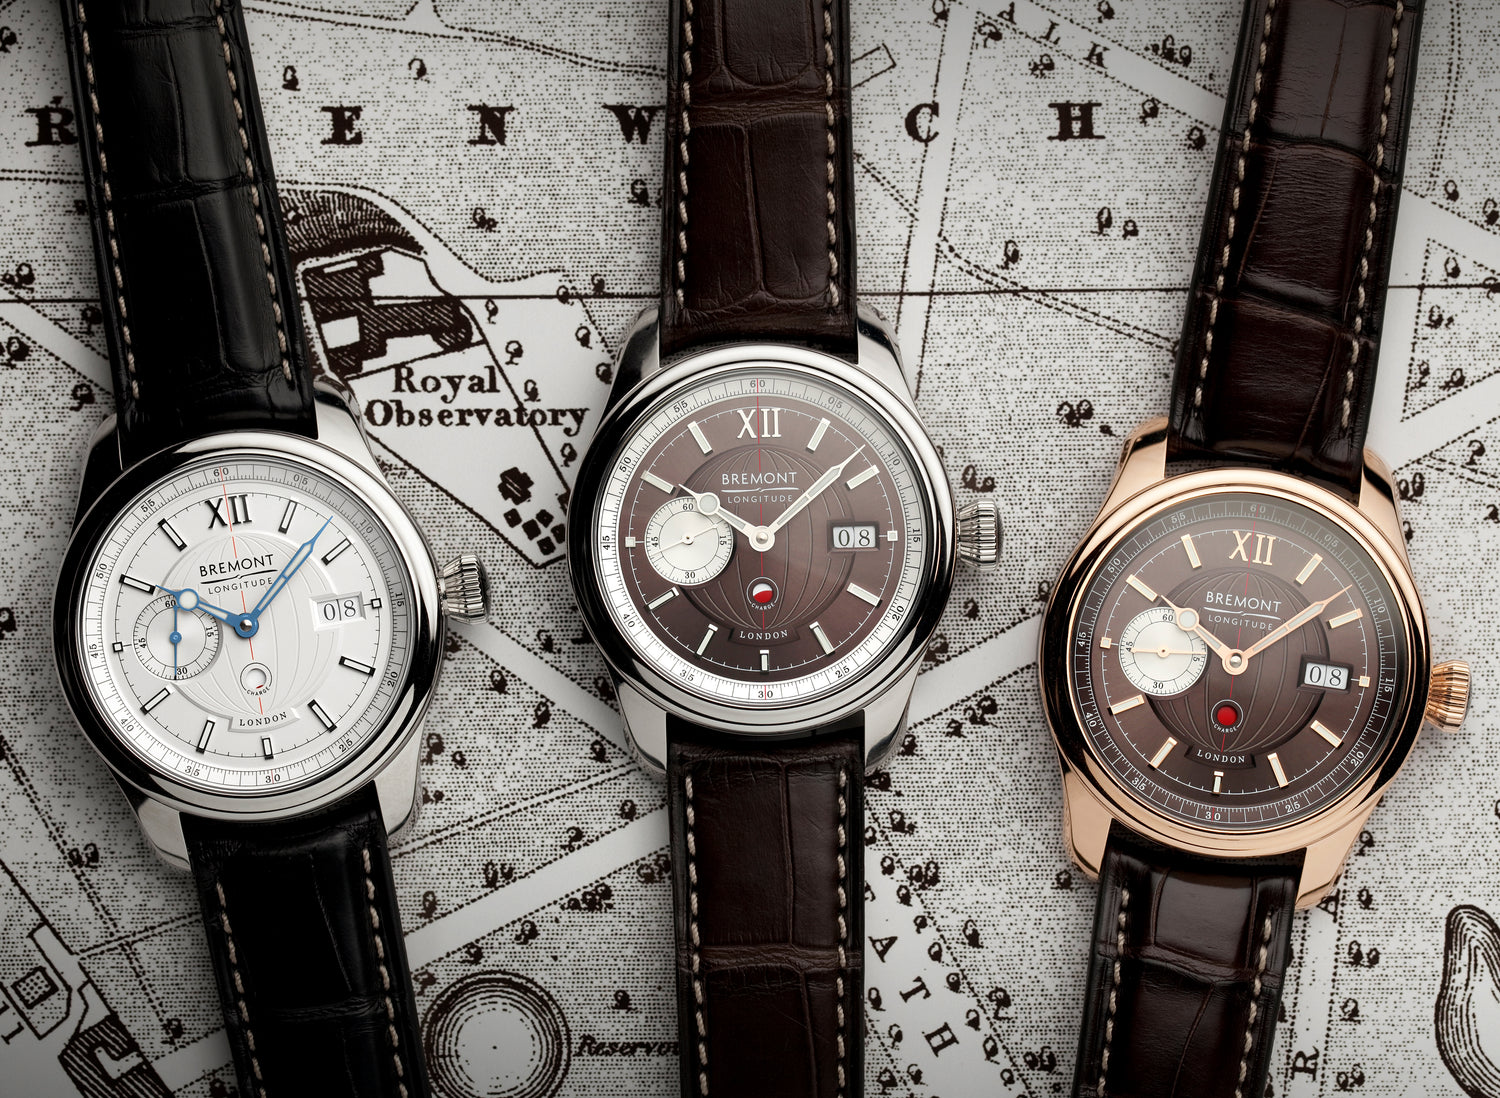 A monumental year for Bremont and British watchmaking